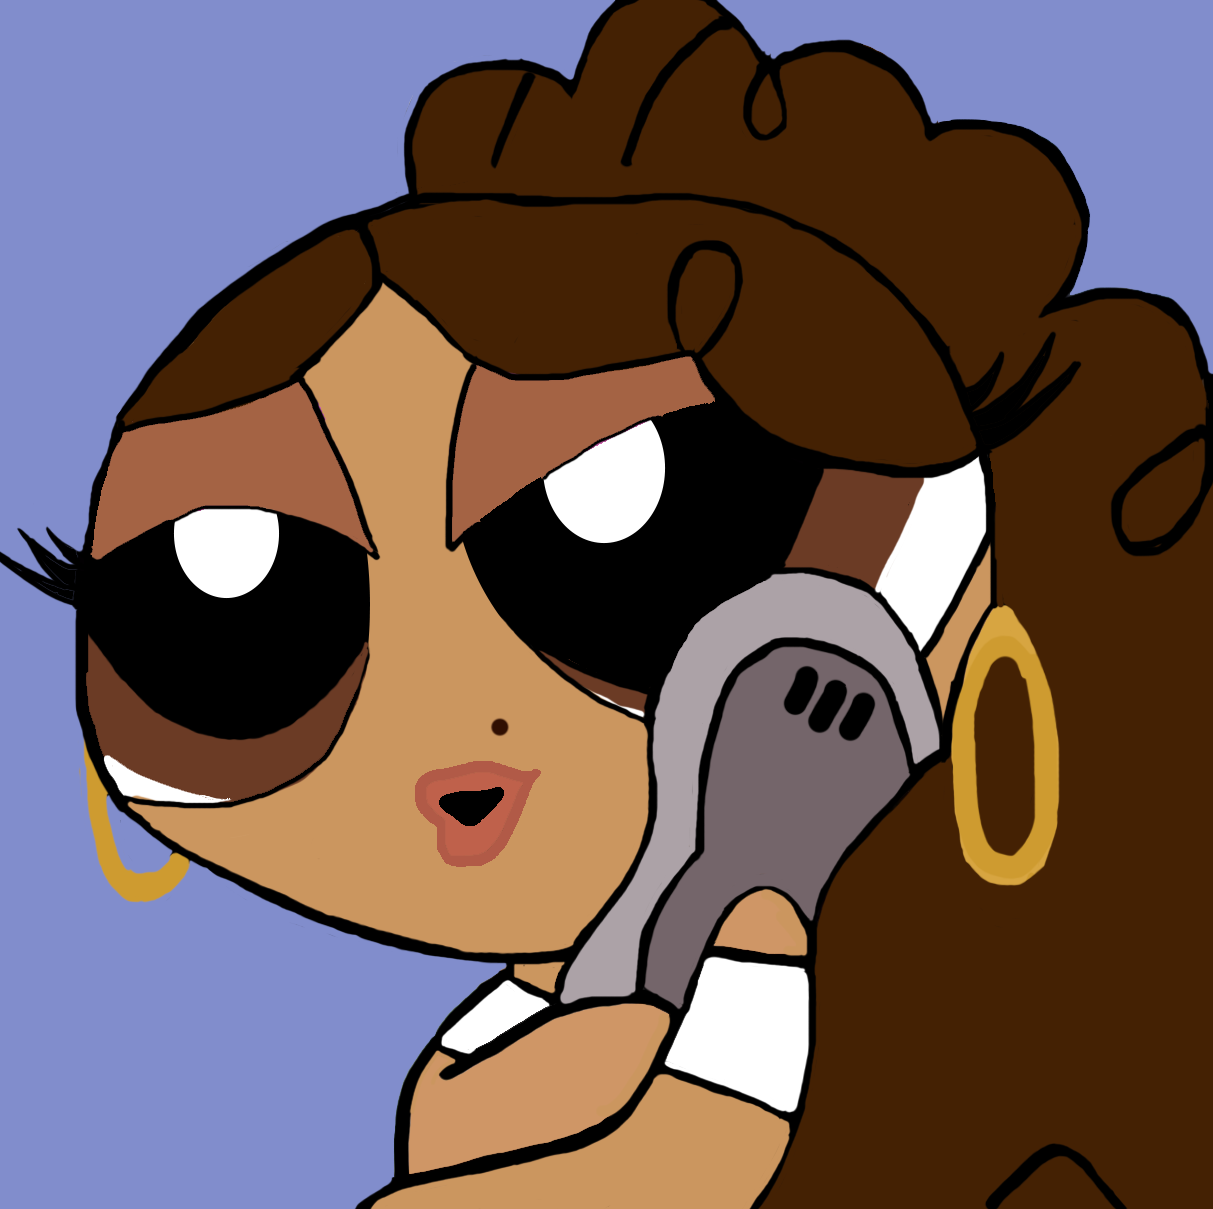 an illustration of a girl. She has brown eyes and long brown curly hair slicked in a updo. She is holding a small, grey cell phone with her left hand and is propped on her shoulder.